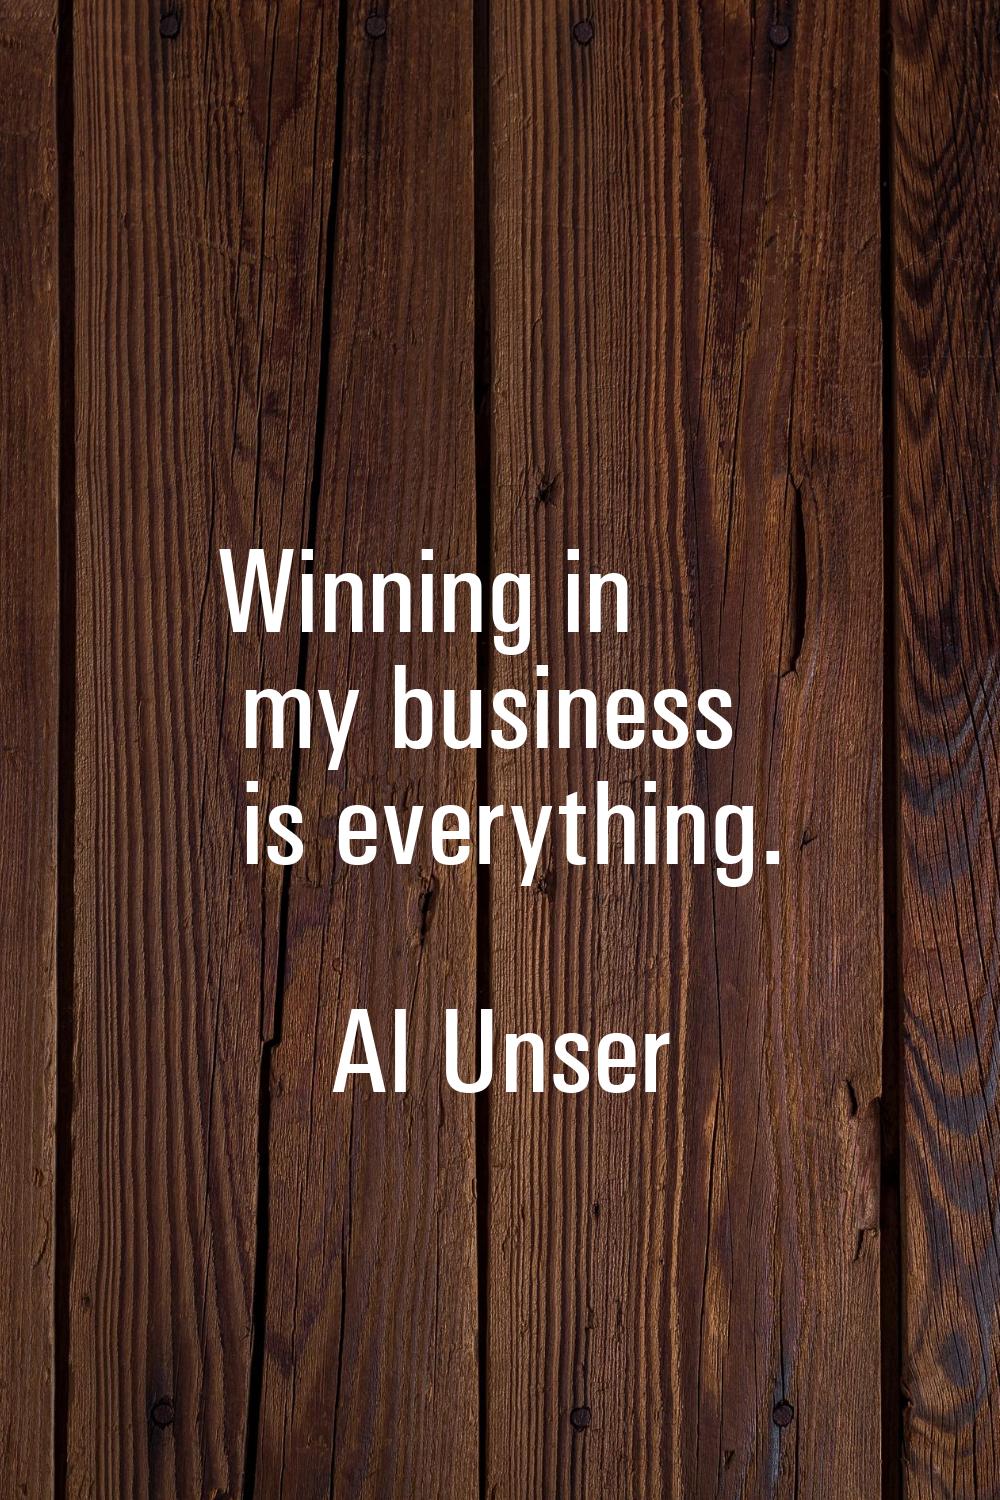 Winning in my business is everything.